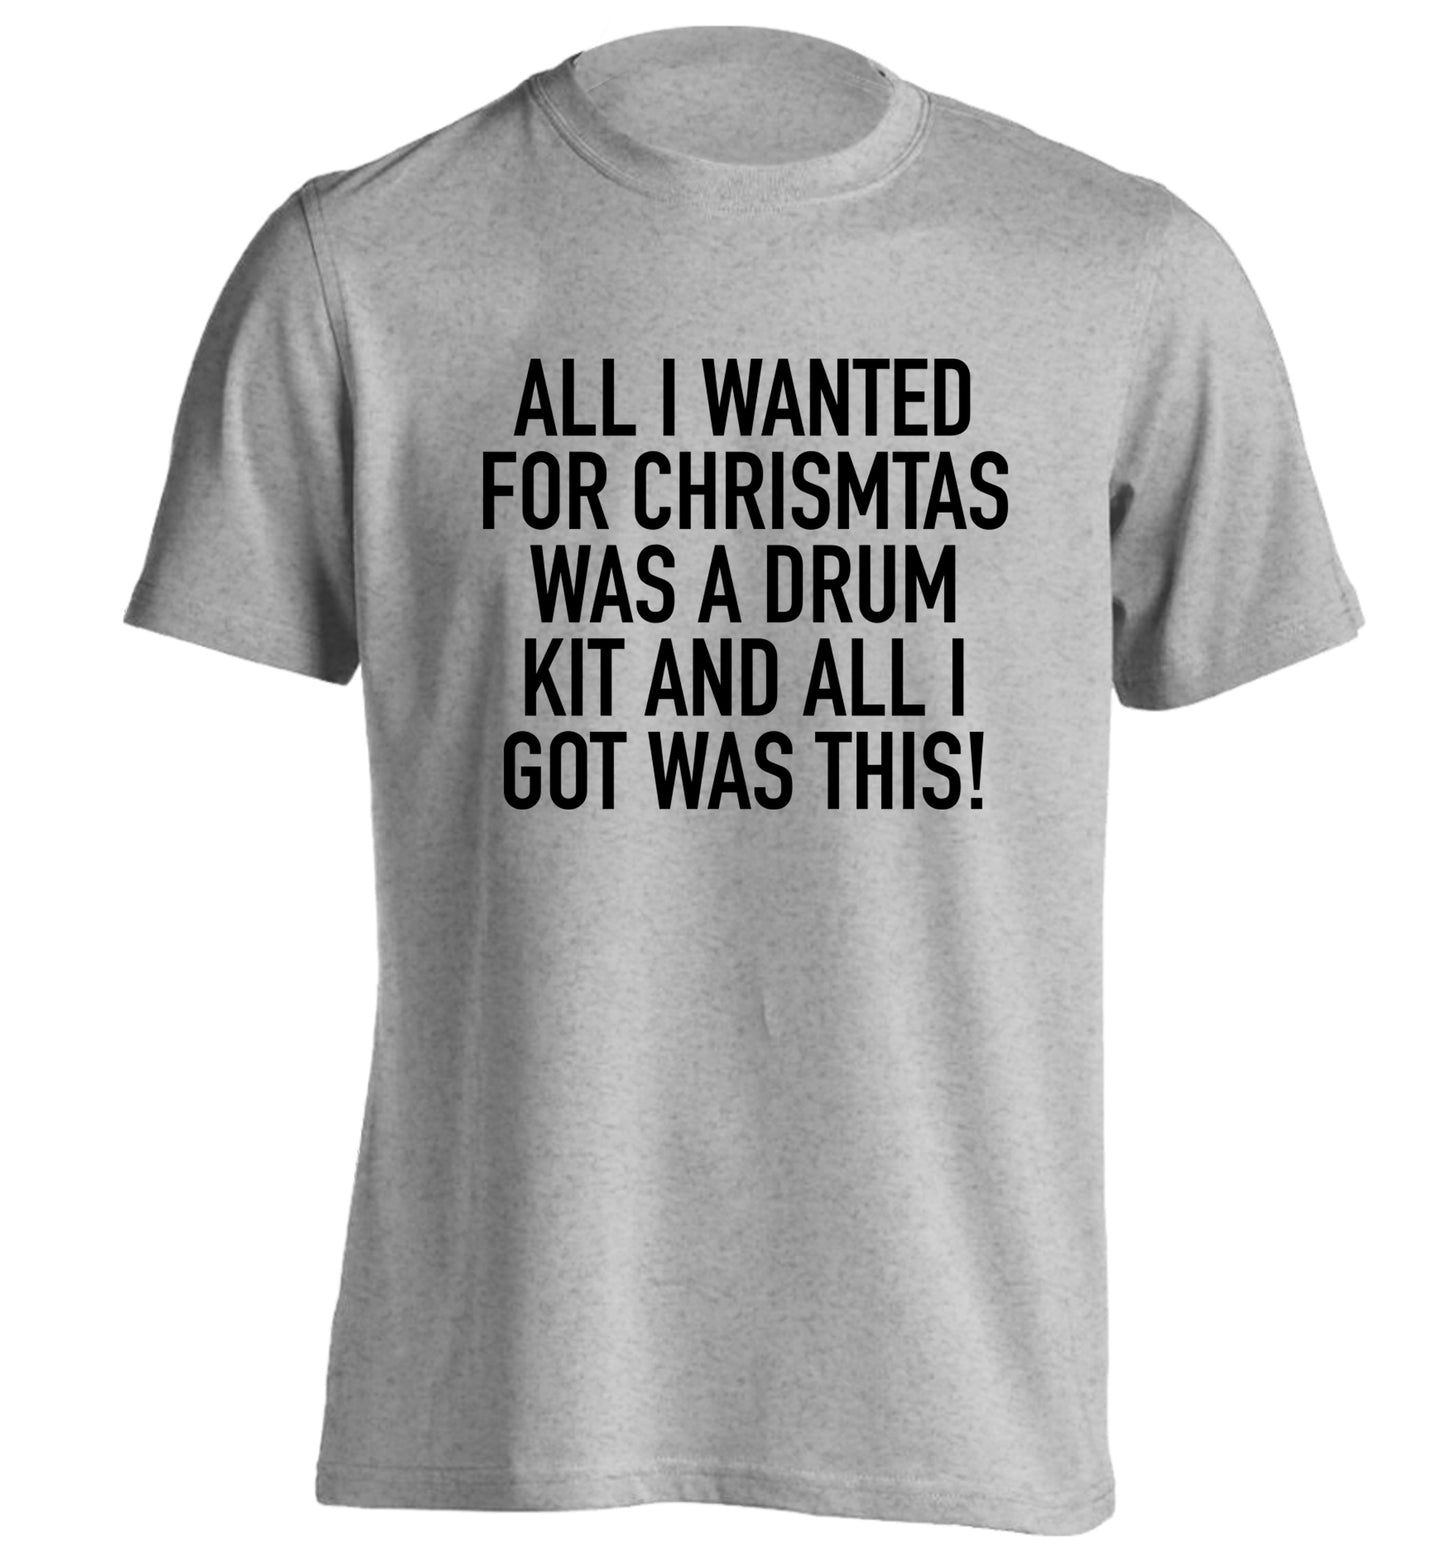 All I wanted for Christmas was a drum kit and all I got was this! adults unisex grey Tshirt 2XL